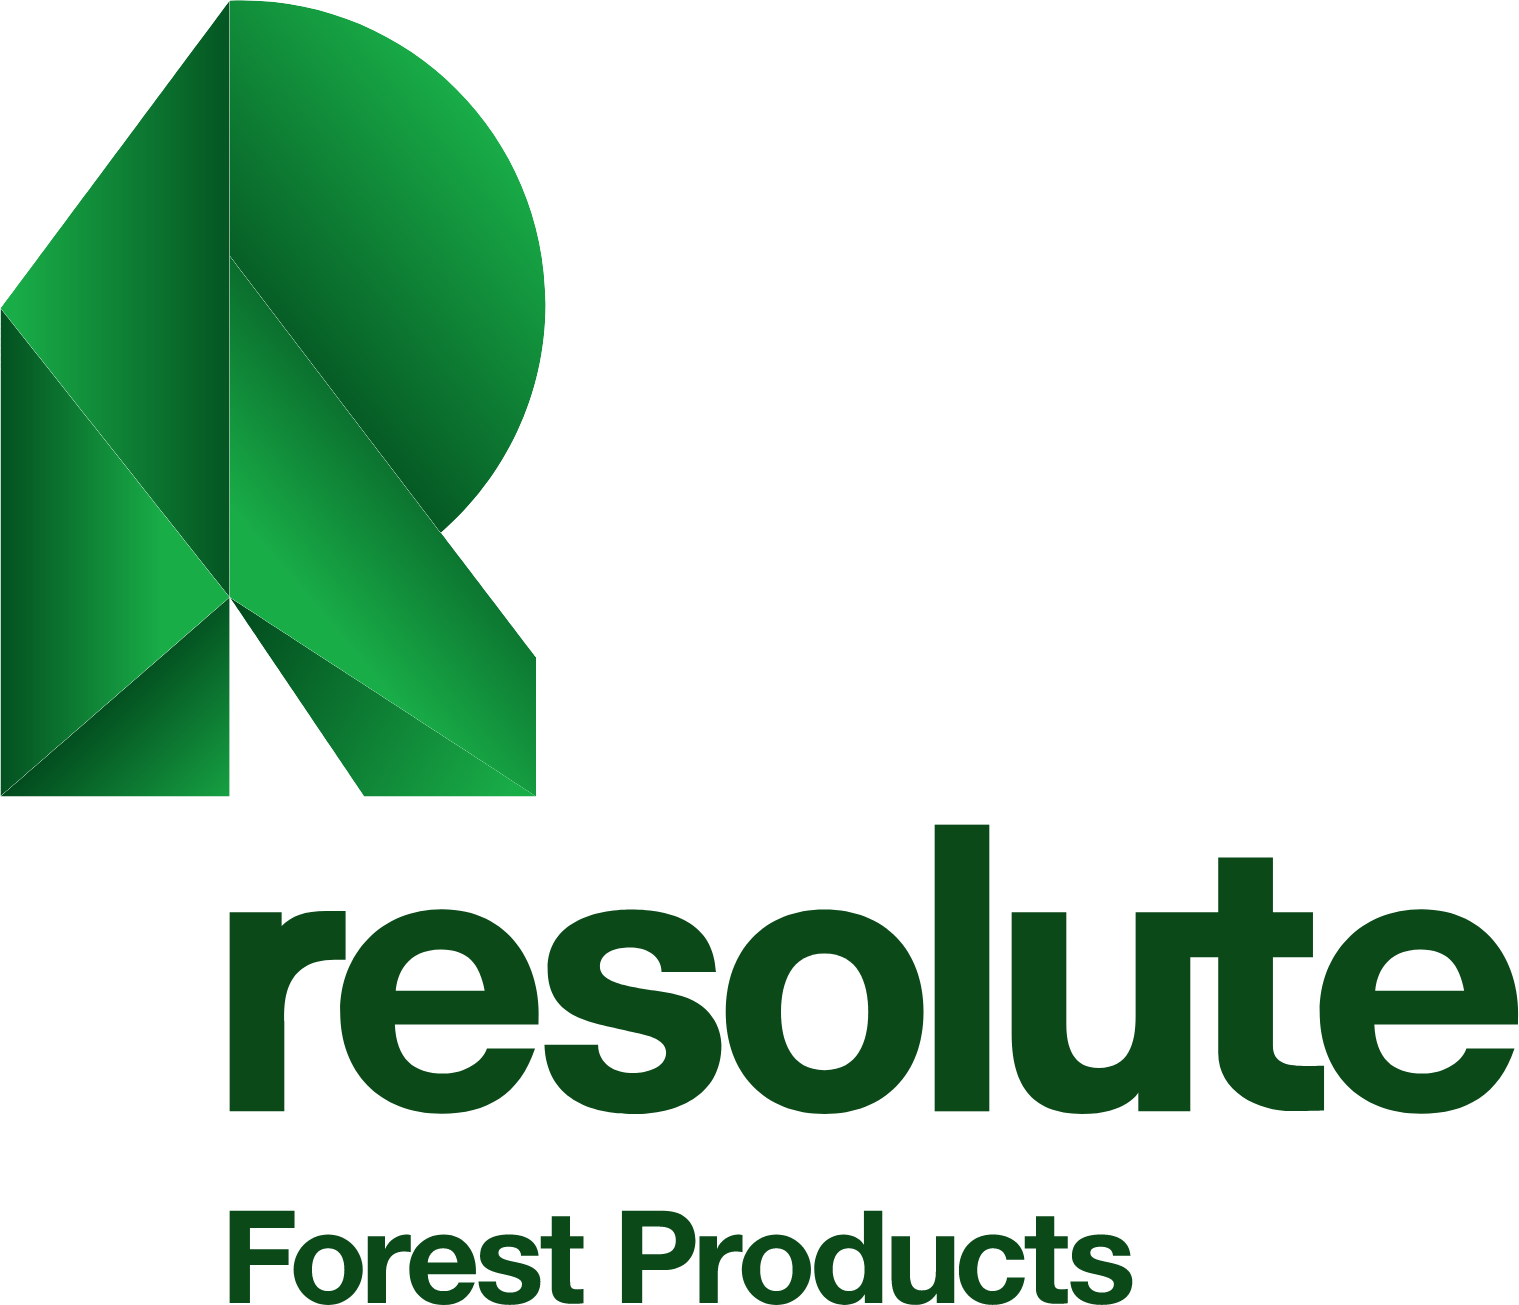 Resolute Forest Products logo large (transparent PNG)